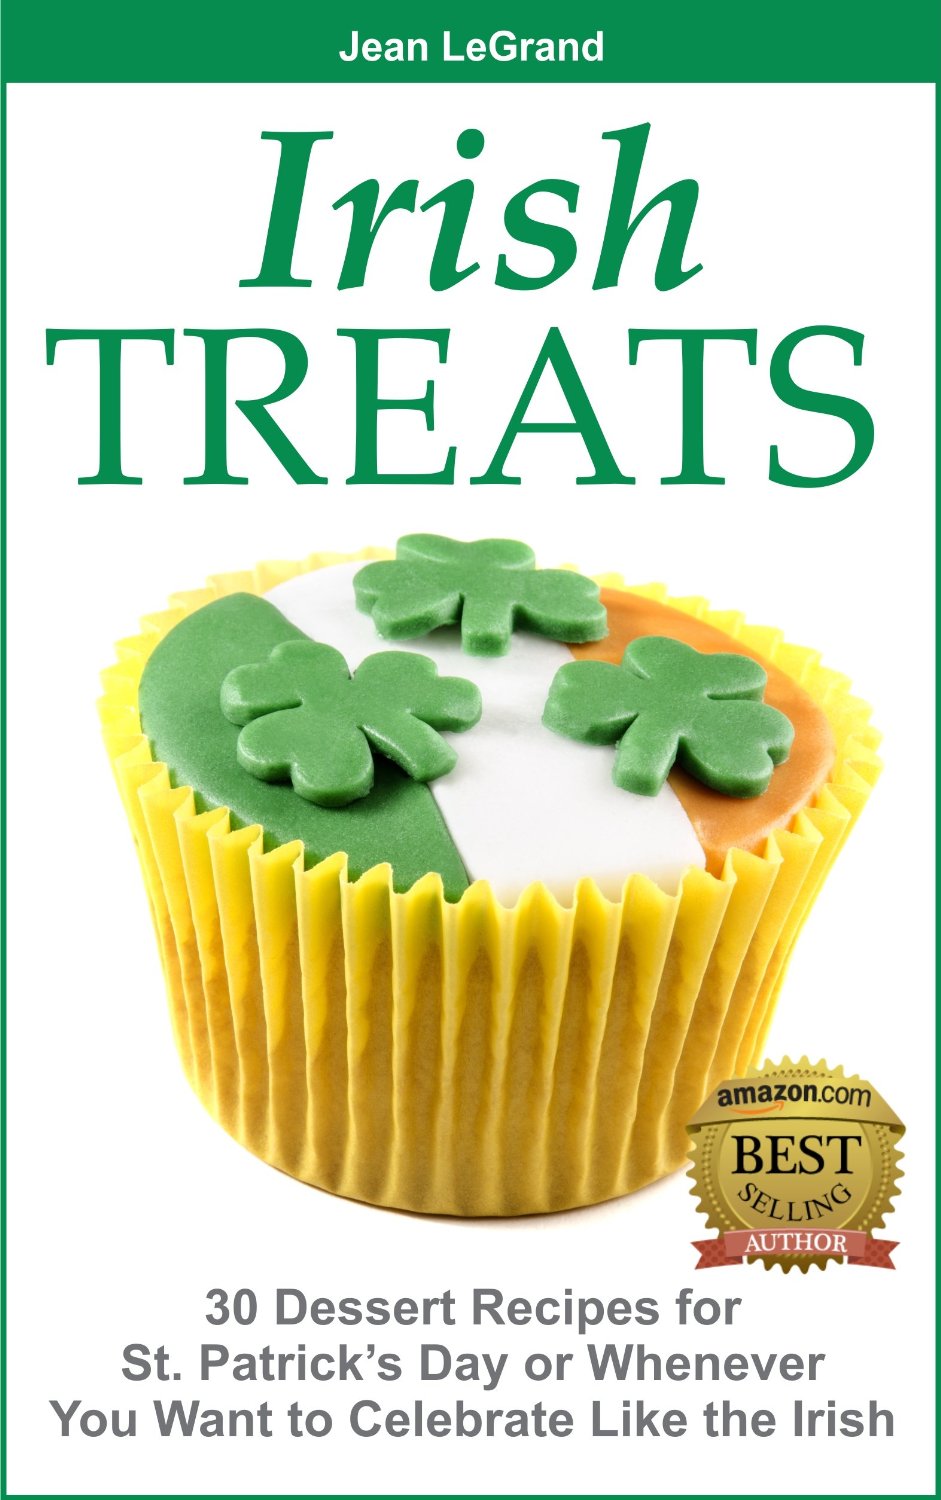 IRISH TREATS – 30 Dessert Recipes for St. Patrick’s Day or Whenever You Want to Celebrate Like the Irish by Jean LeGrand